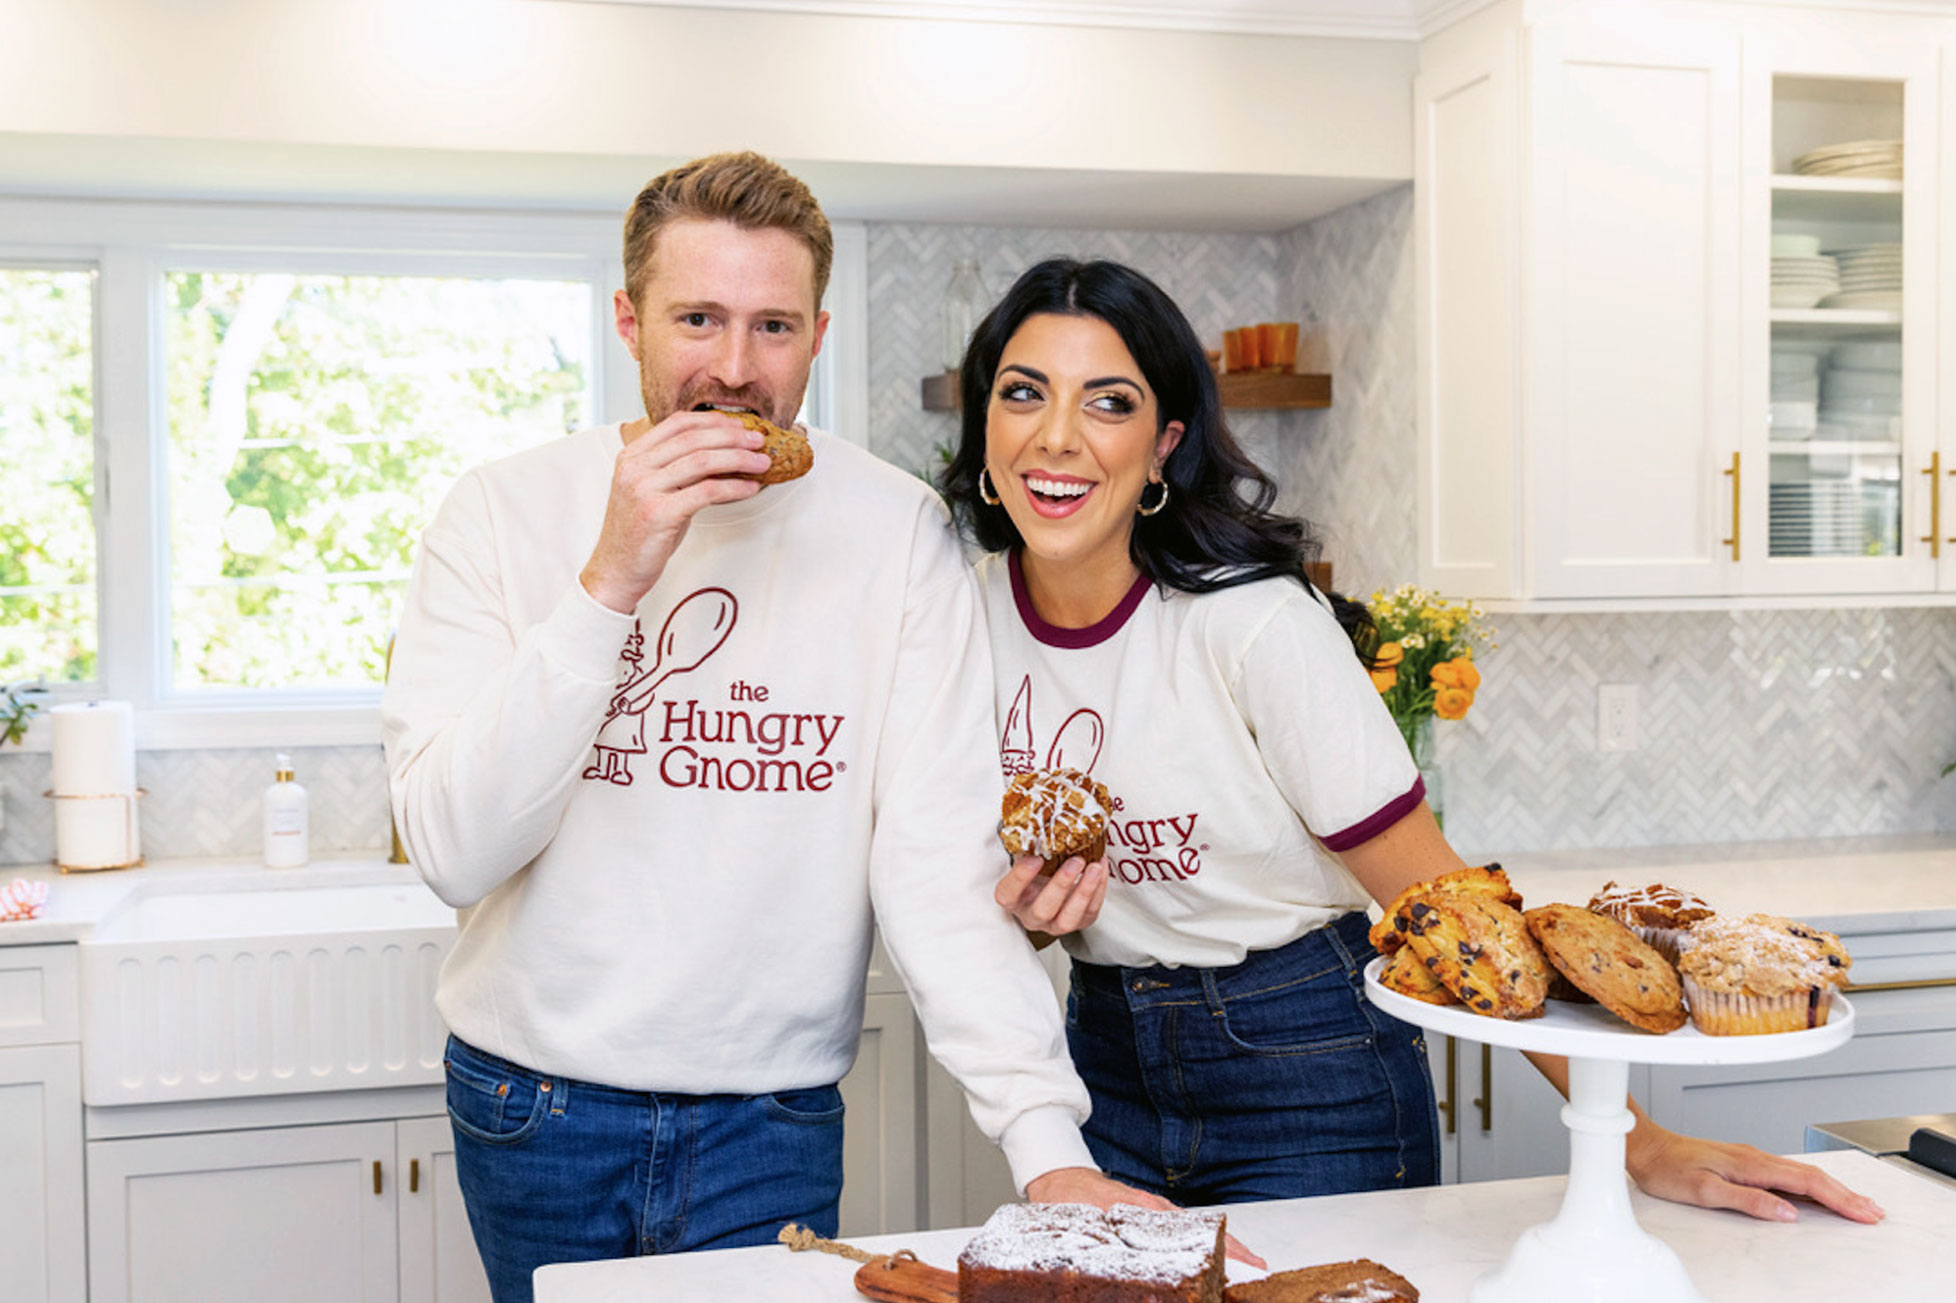 Dan and Danielle Sepsy in their kitchen eating scones and wearing Hungry Gnome apparel, courtesy